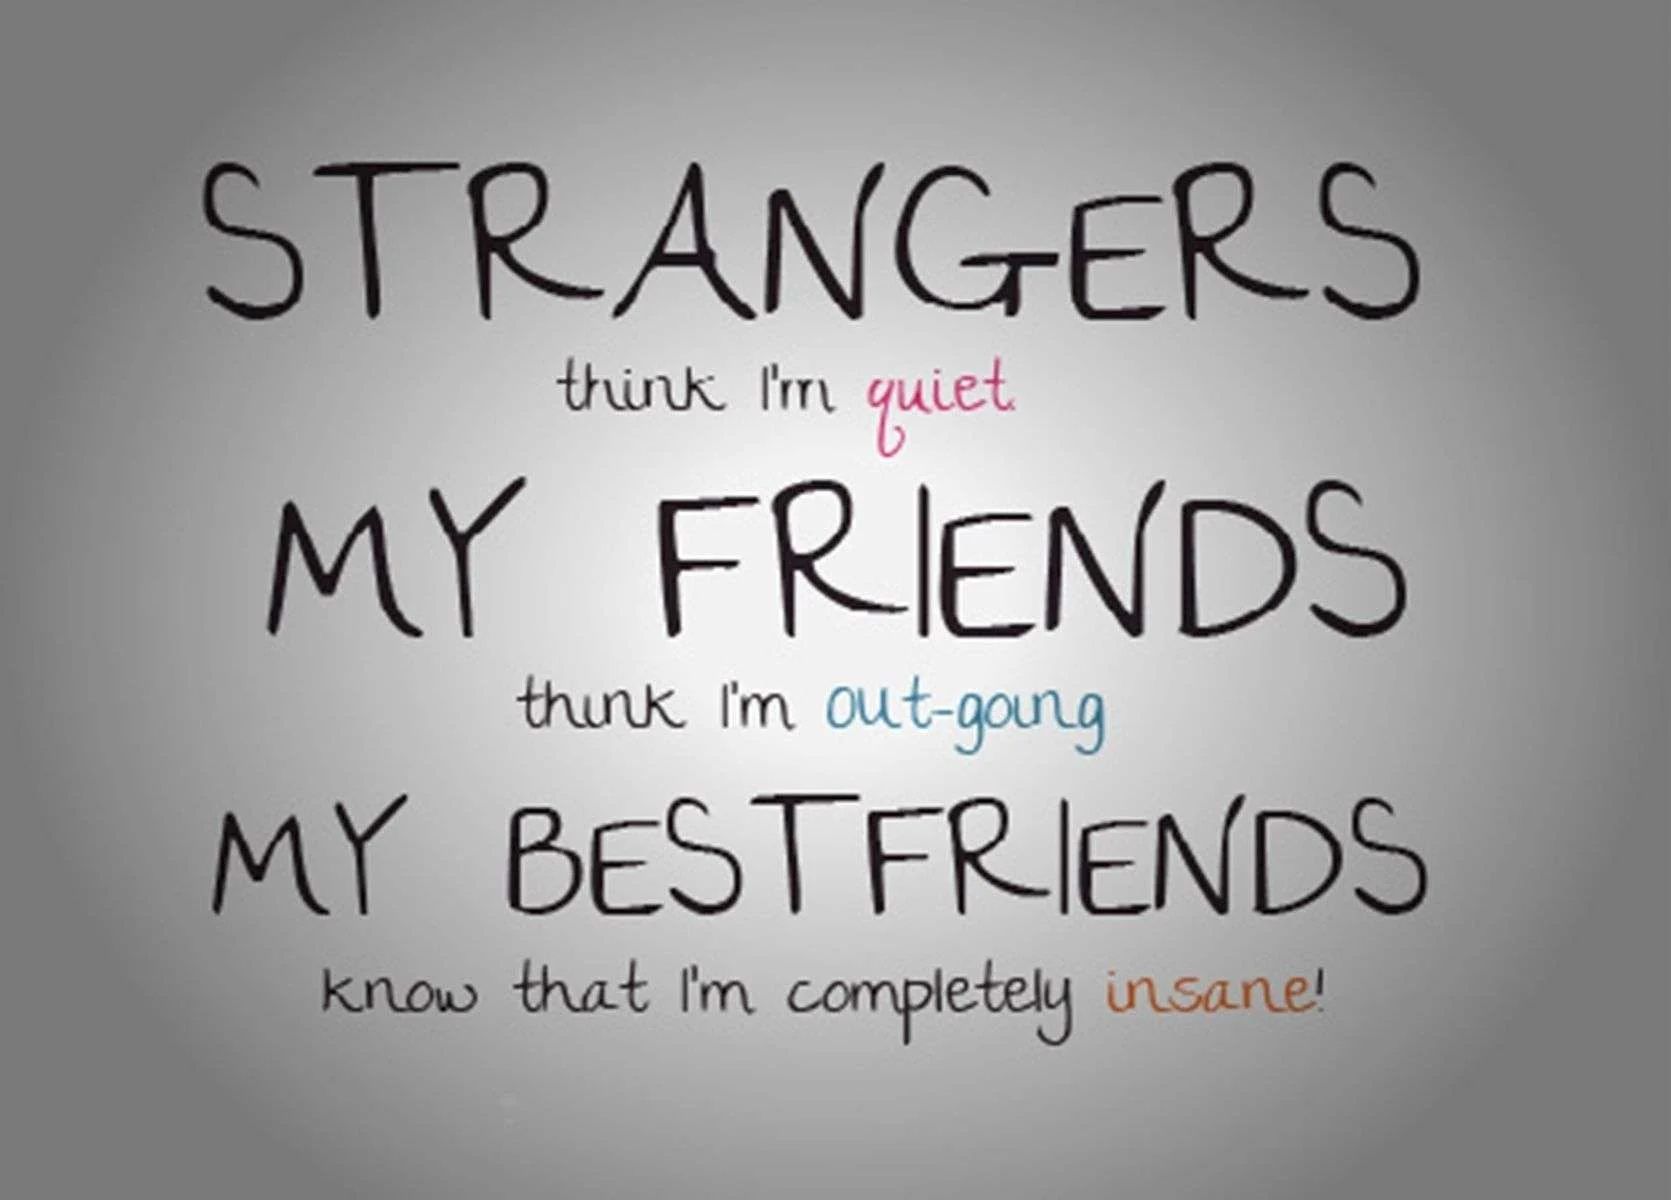 STRANGERS
think I'm quiet.
MY FRIENDS
think I'm out-going
MY BESTFRIENDS
know that I'm completely insane!